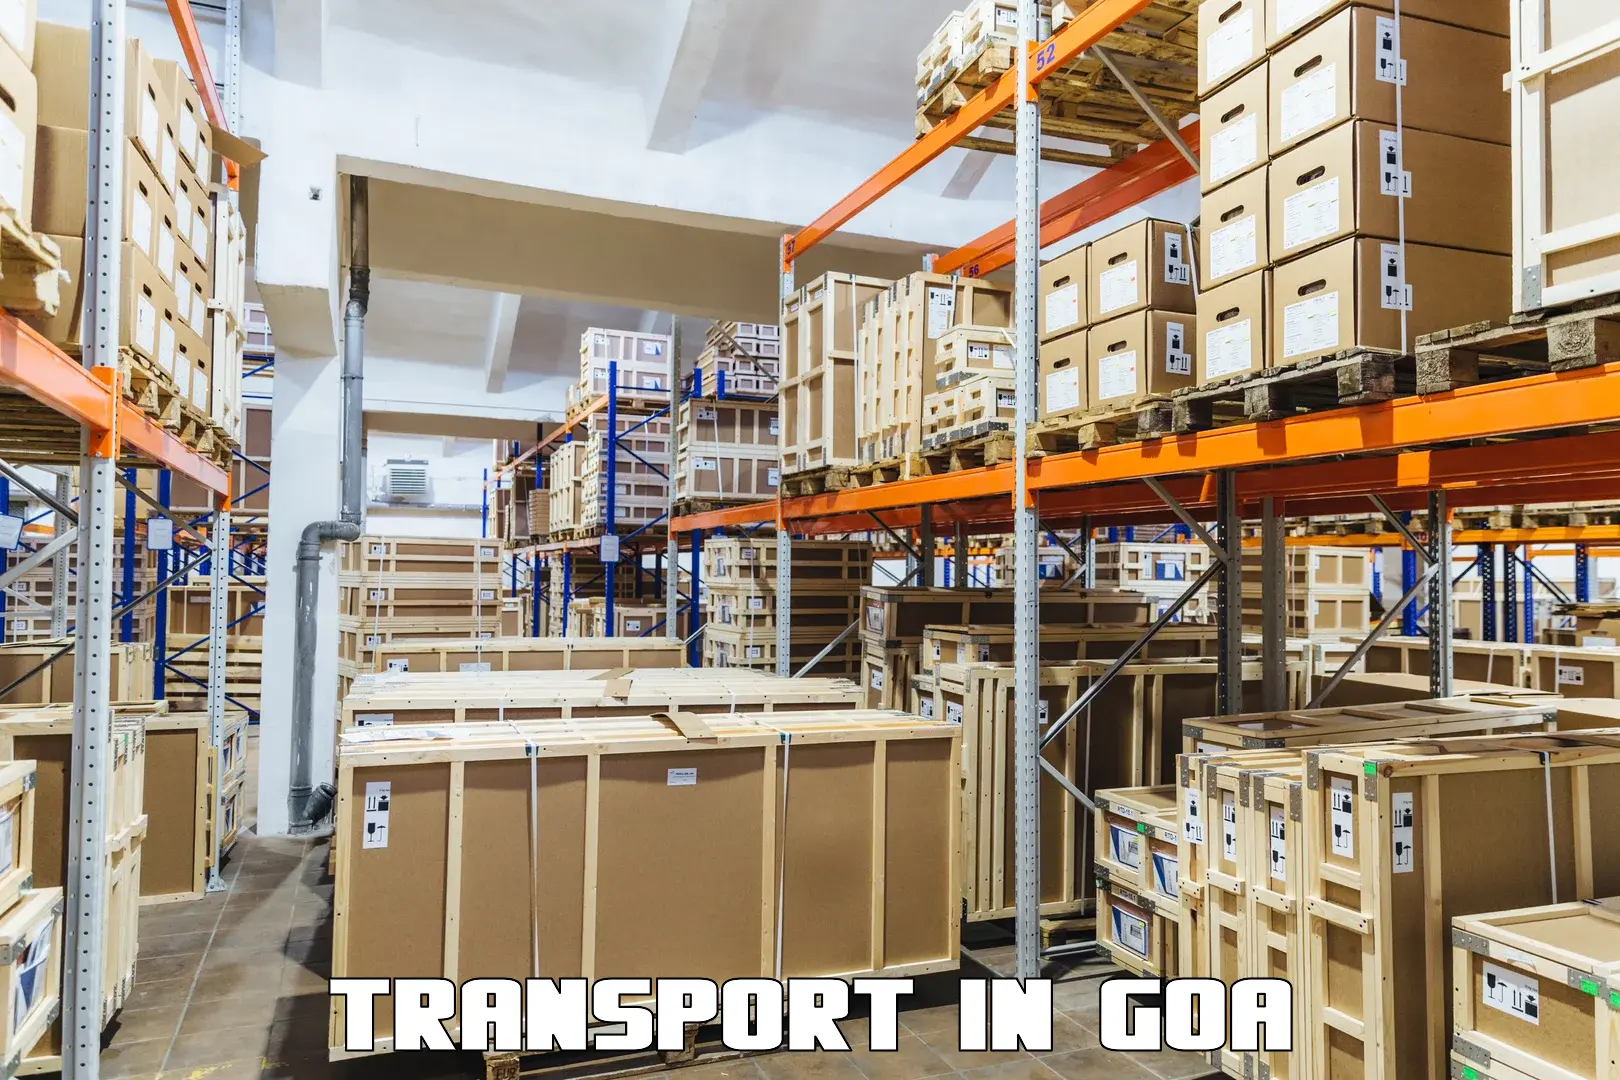 Vehicle transport services in Goa